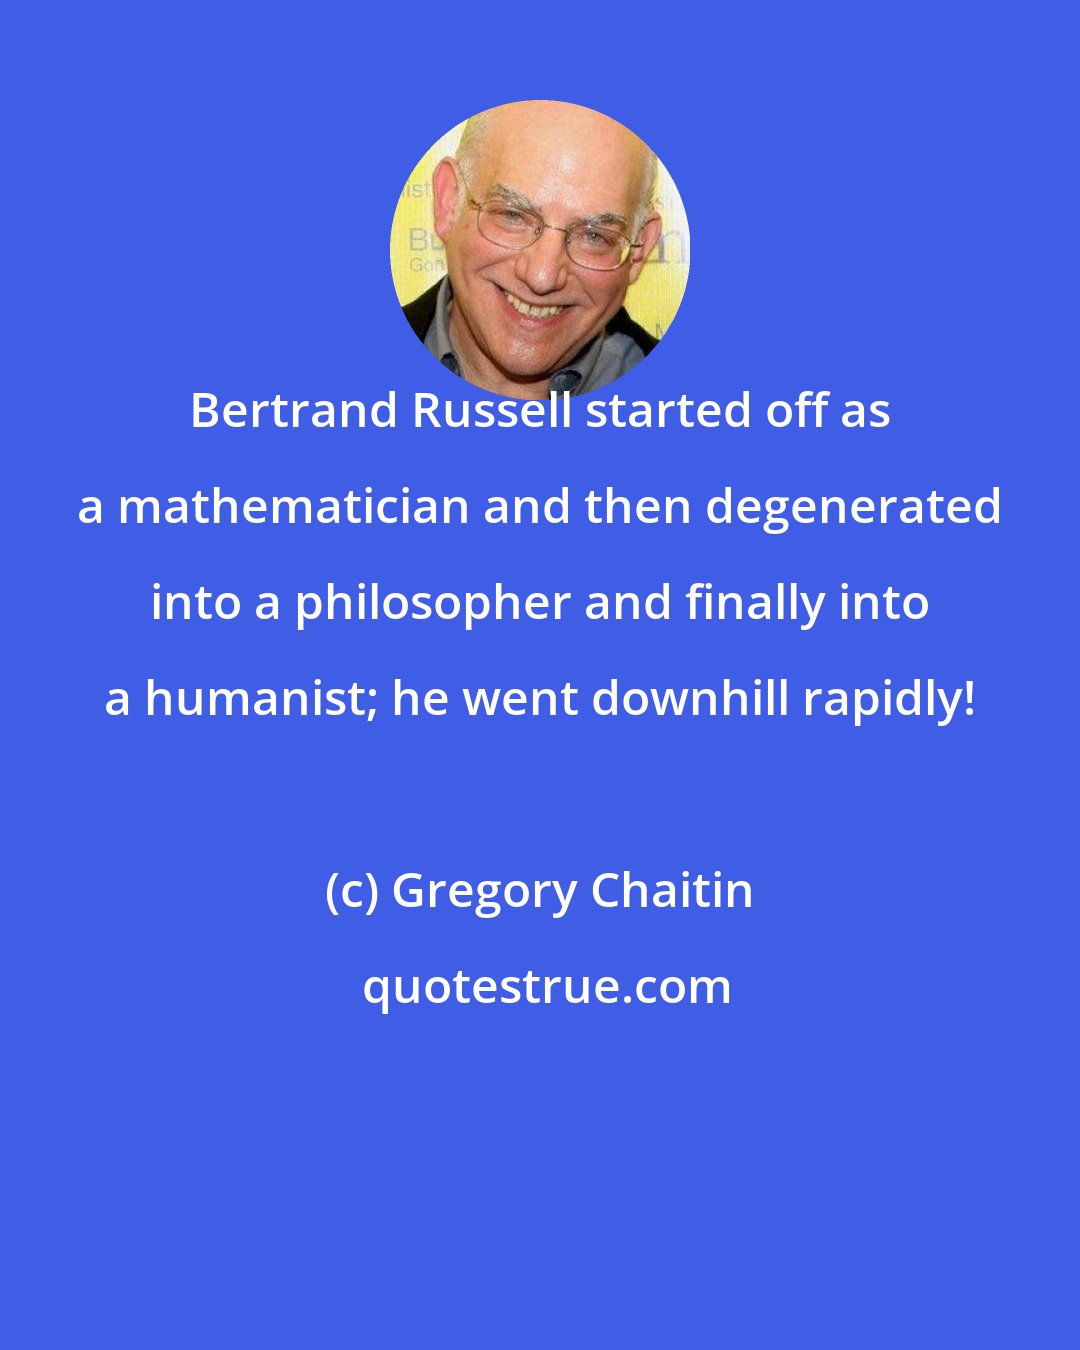 Gregory Chaitin: Bertrand Russell started off as a mathematician and then degenerated into a philosopher and finally into a humanist; he went downhill rapidly!